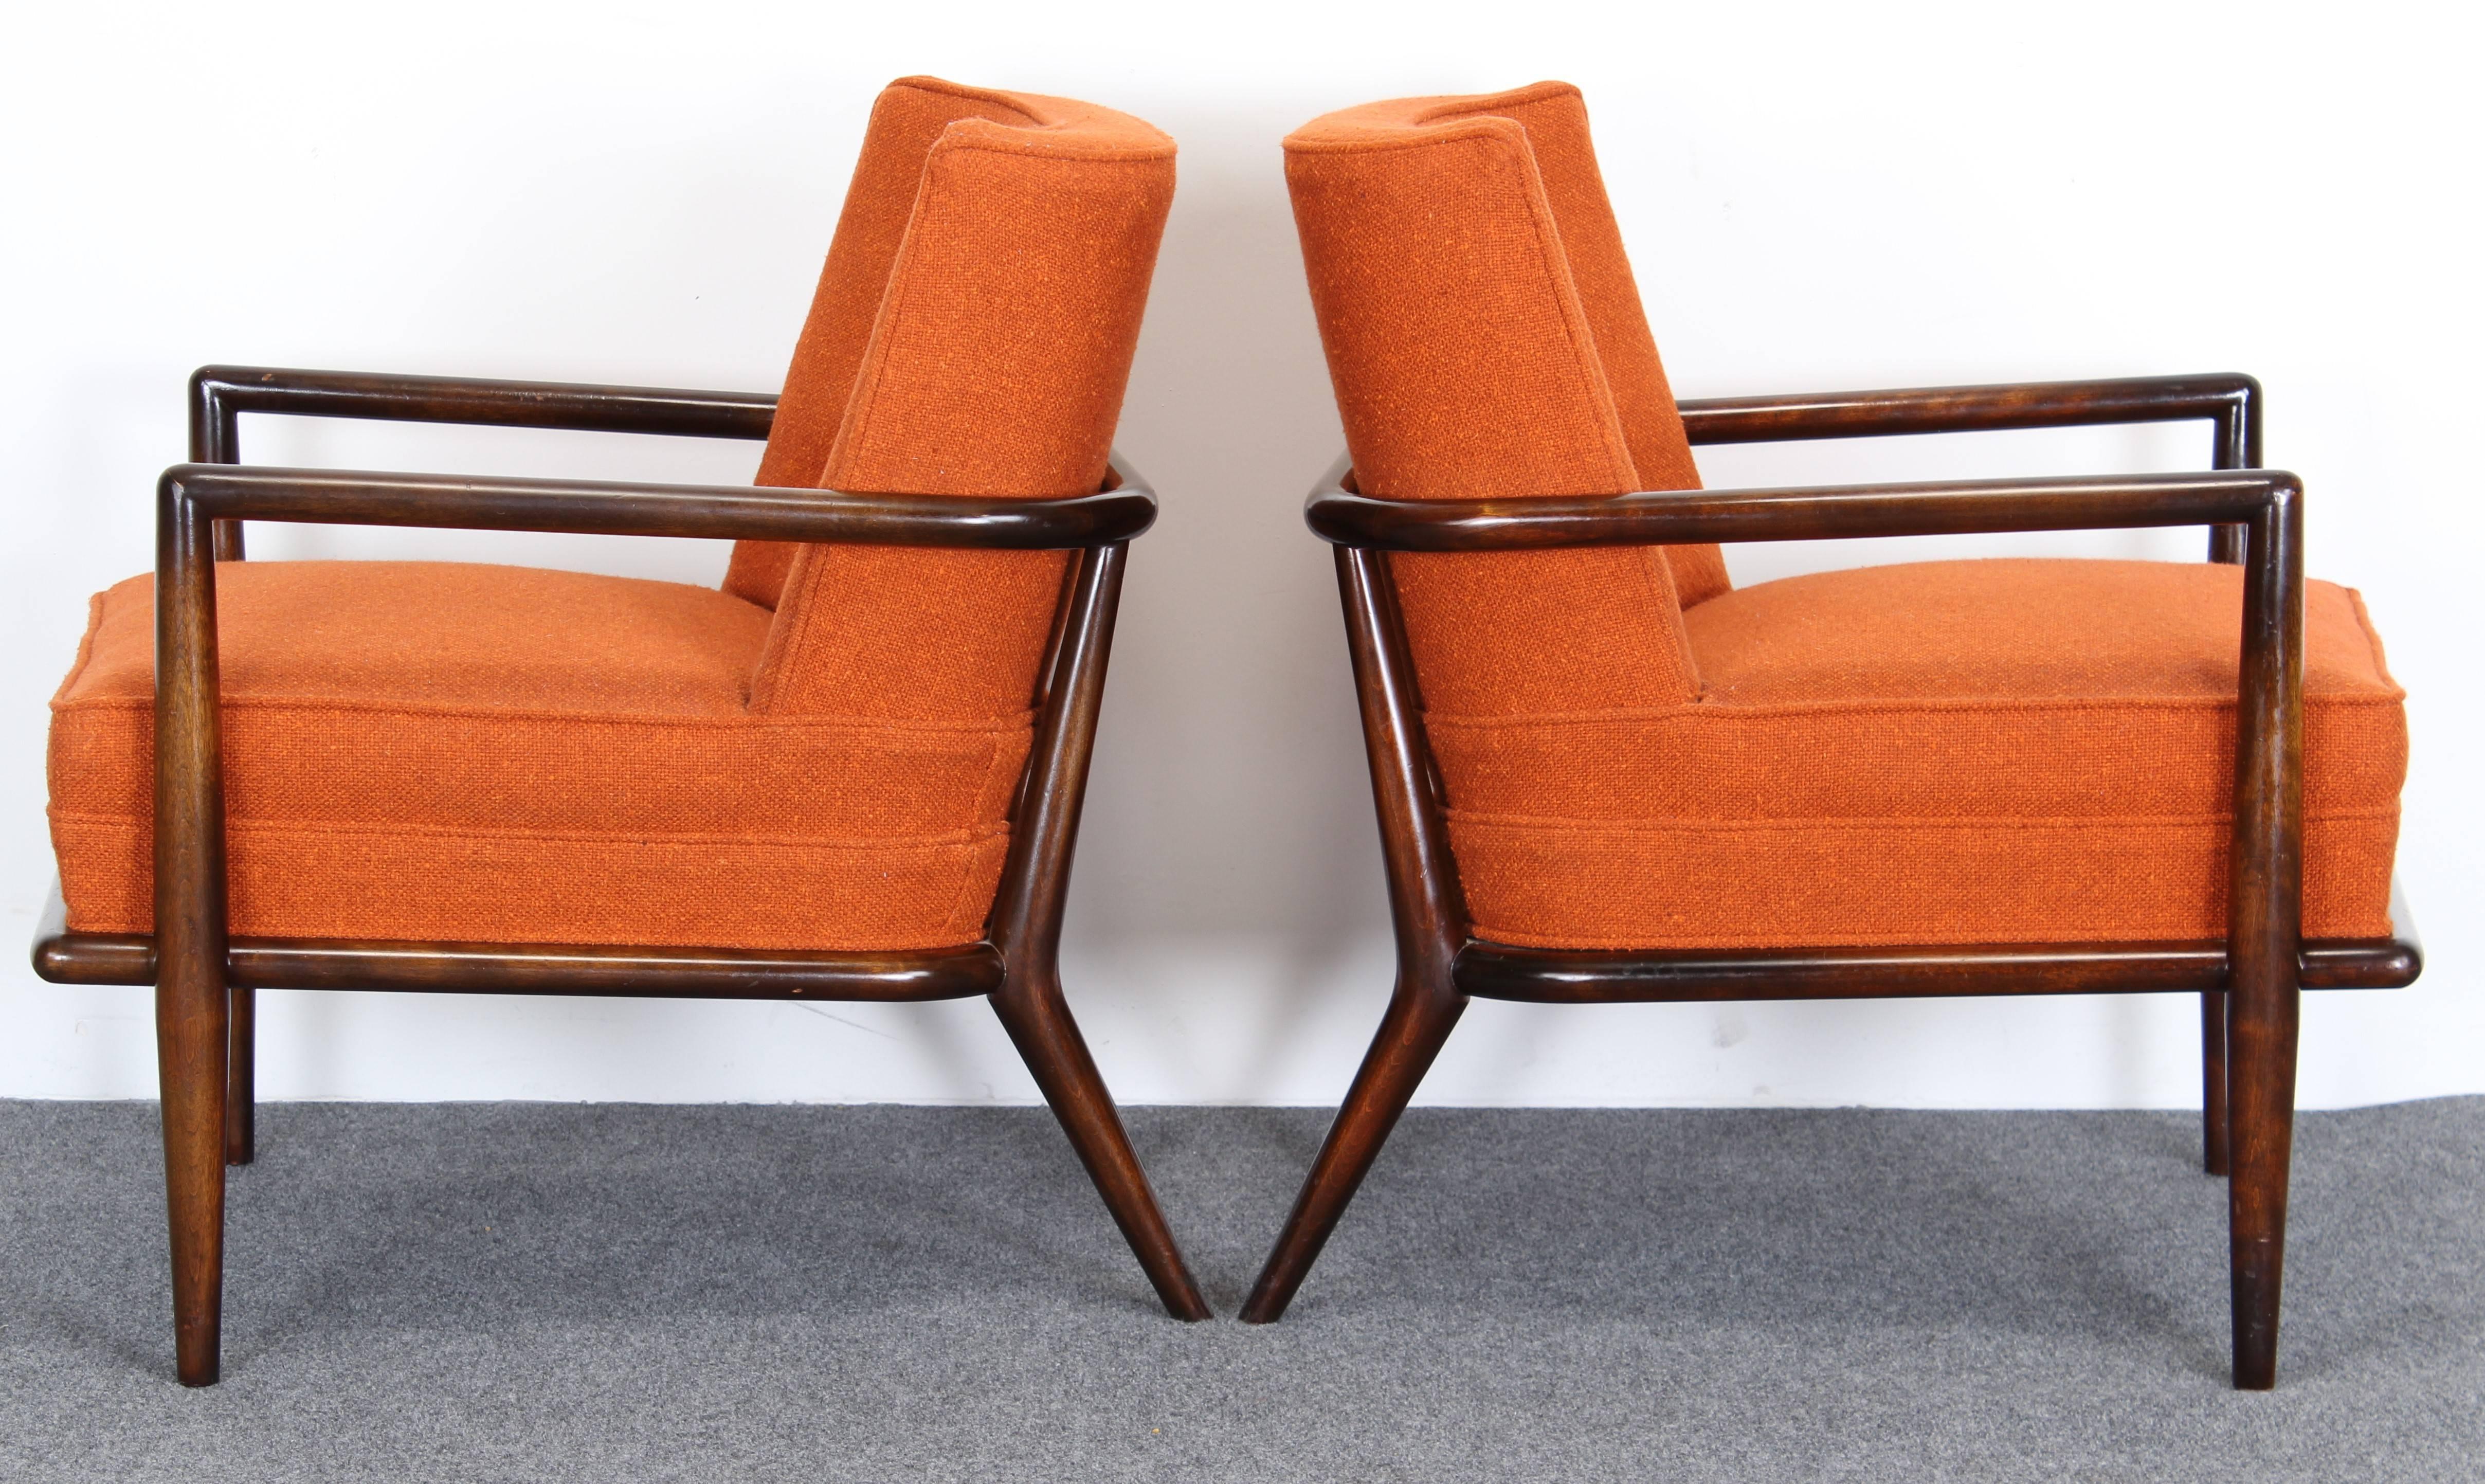 American Pair of Lounge Chairs Model No. 1721 by T.H. Robsjohn-Gibbings, 1950s